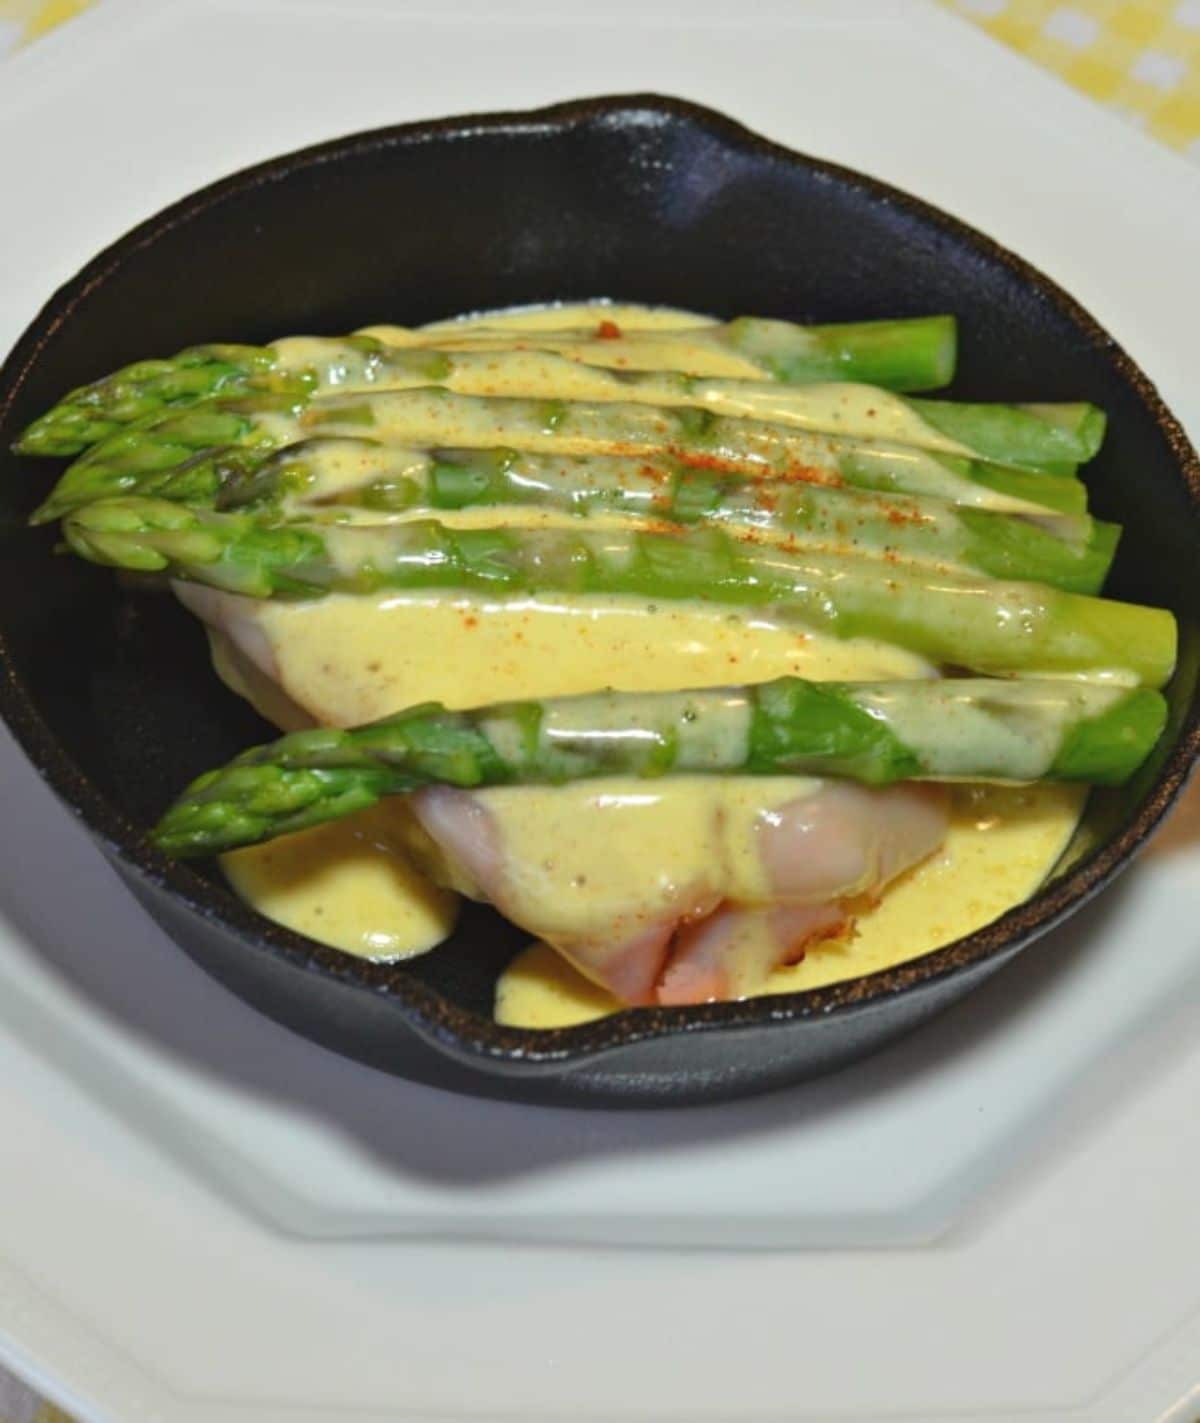 Juicy open-faced asparagus sandwiches in a black skillet.